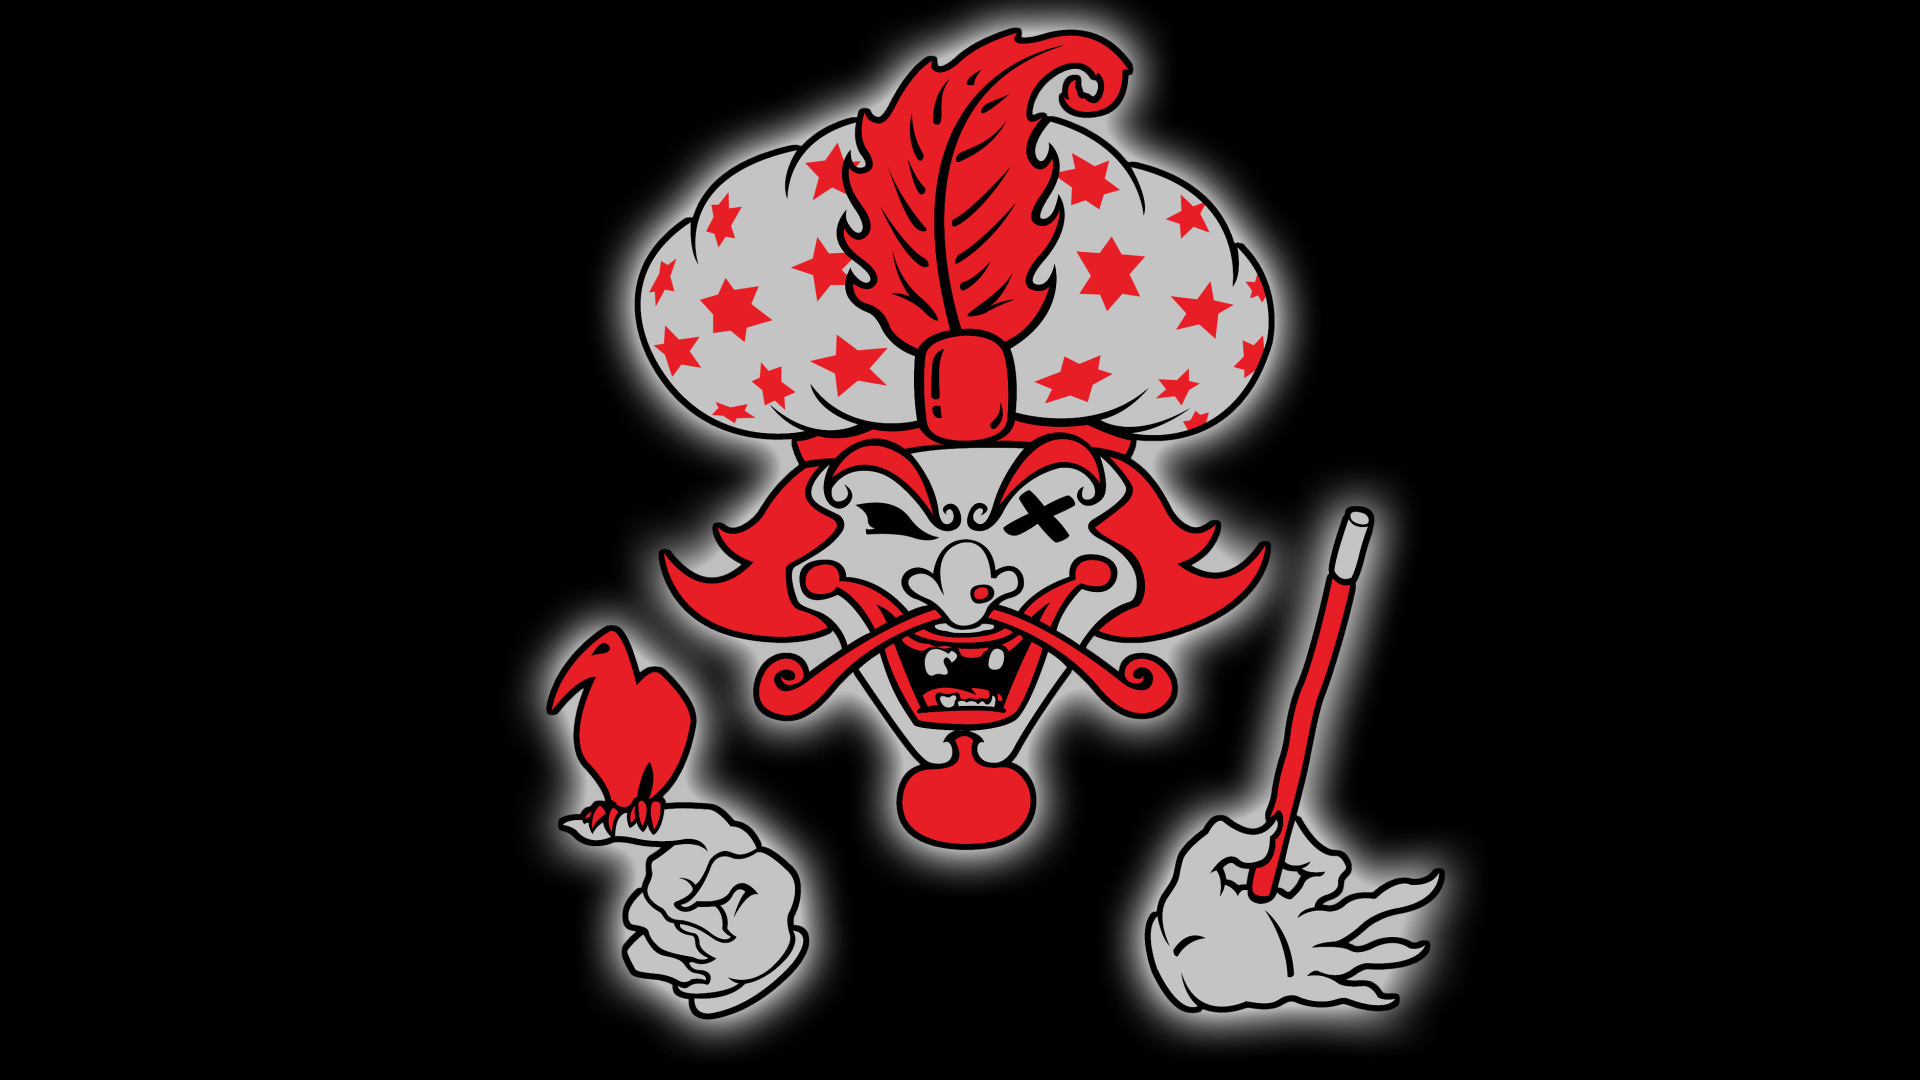 Icp wallpaper pictures